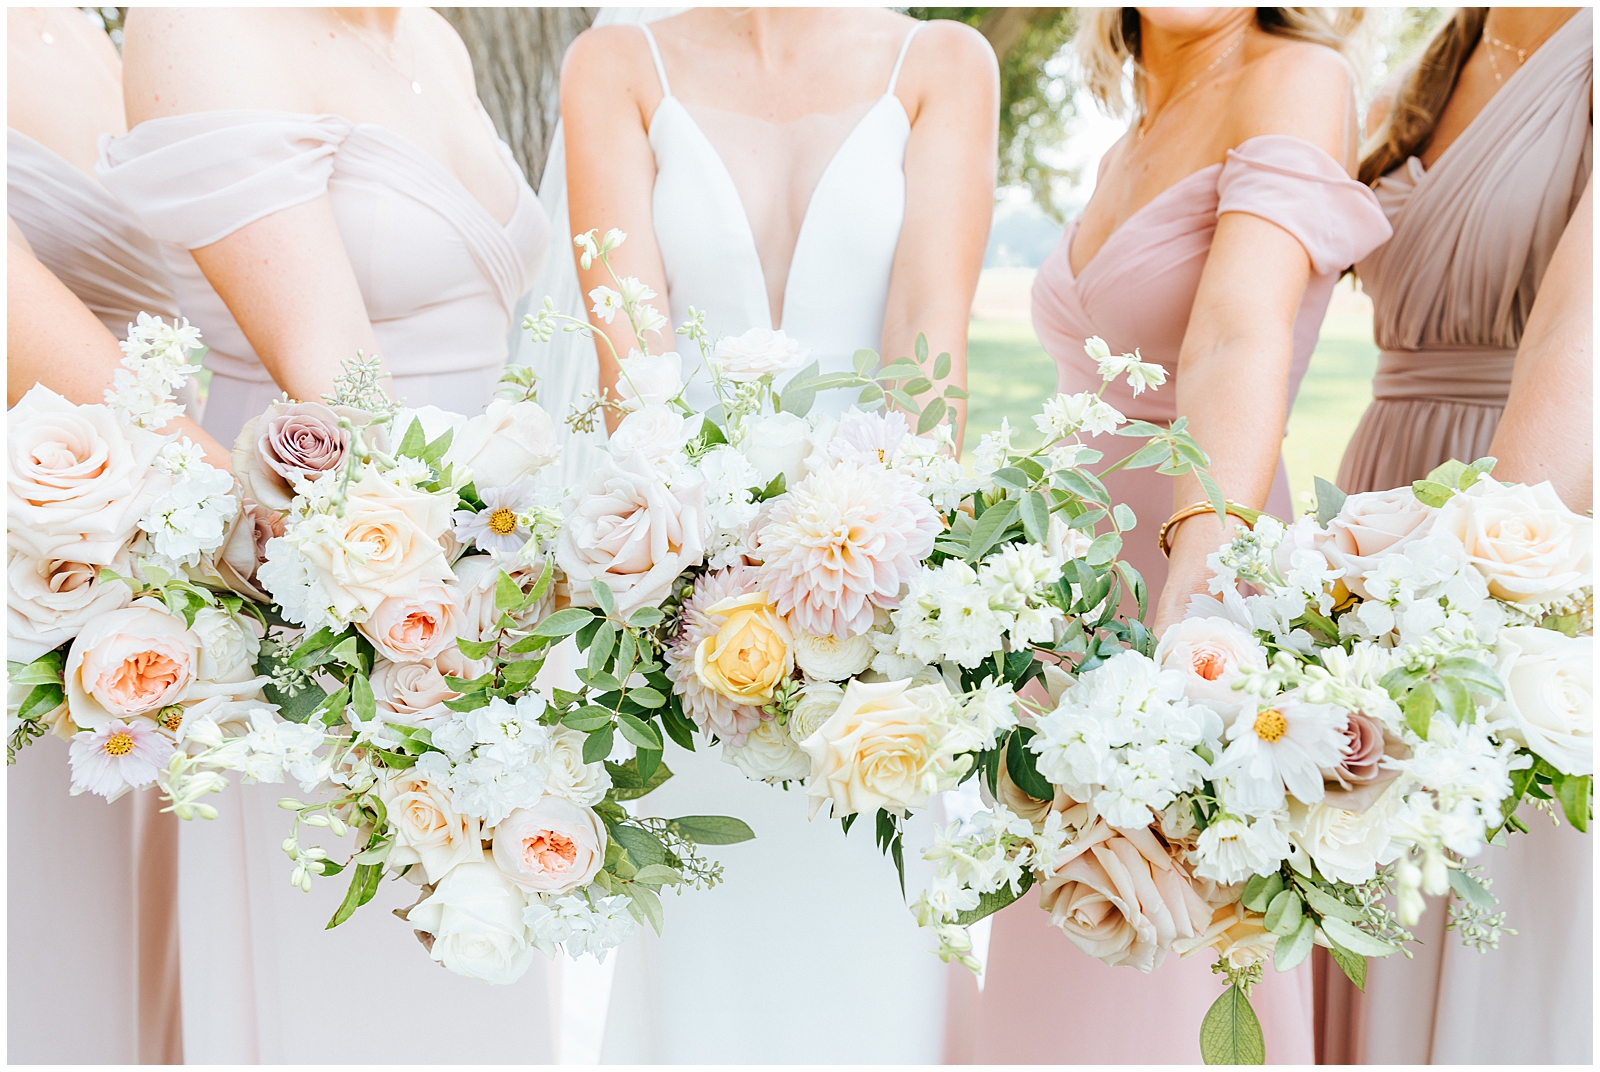 Bridesmaids and Bride's Bouquets with shades of Pinks and Yellows